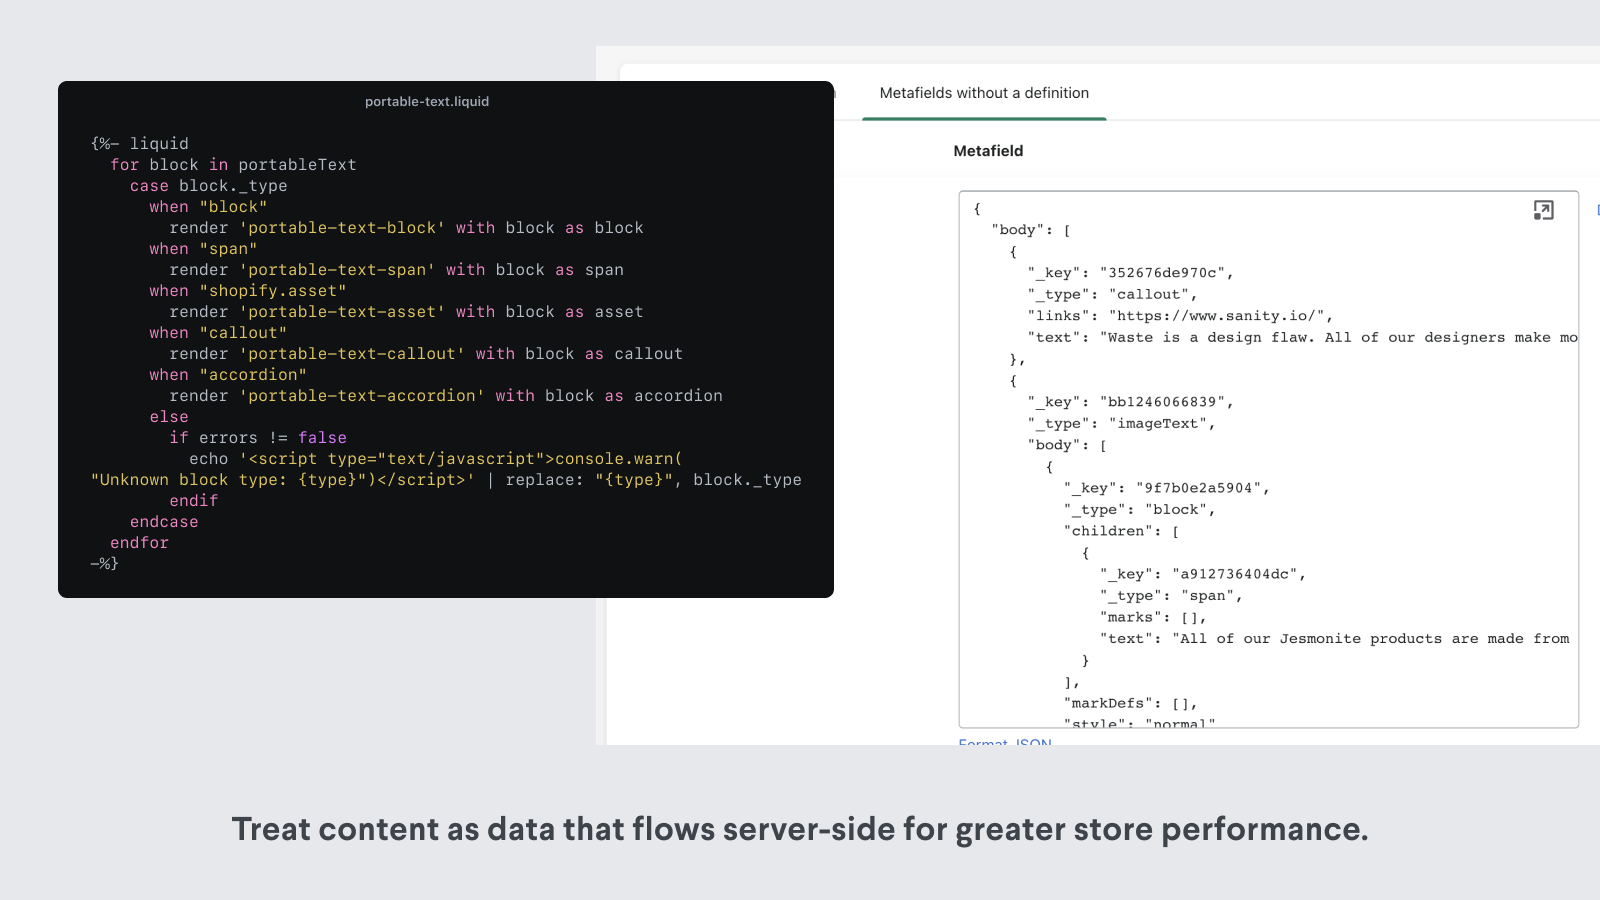 Treat content as data that flows server-side to Shopify.